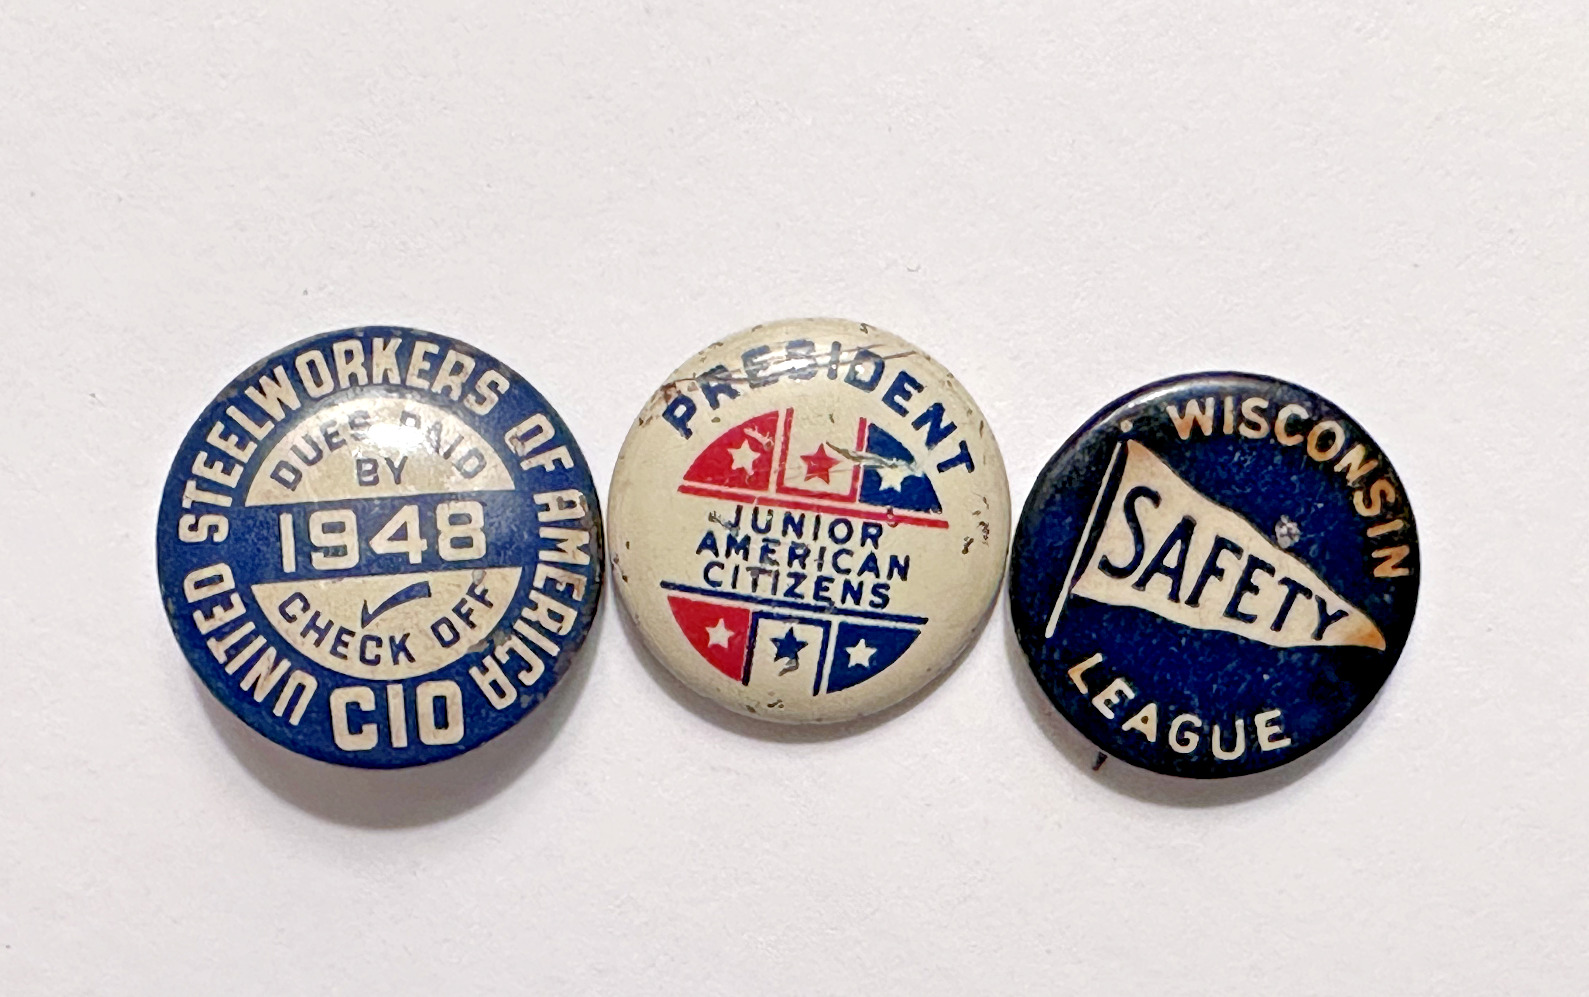 3 VNT PINS - WI SAFETY LEAGUE, UNITED STEELWORKERS, JR AMERICAN CITIZENS A984